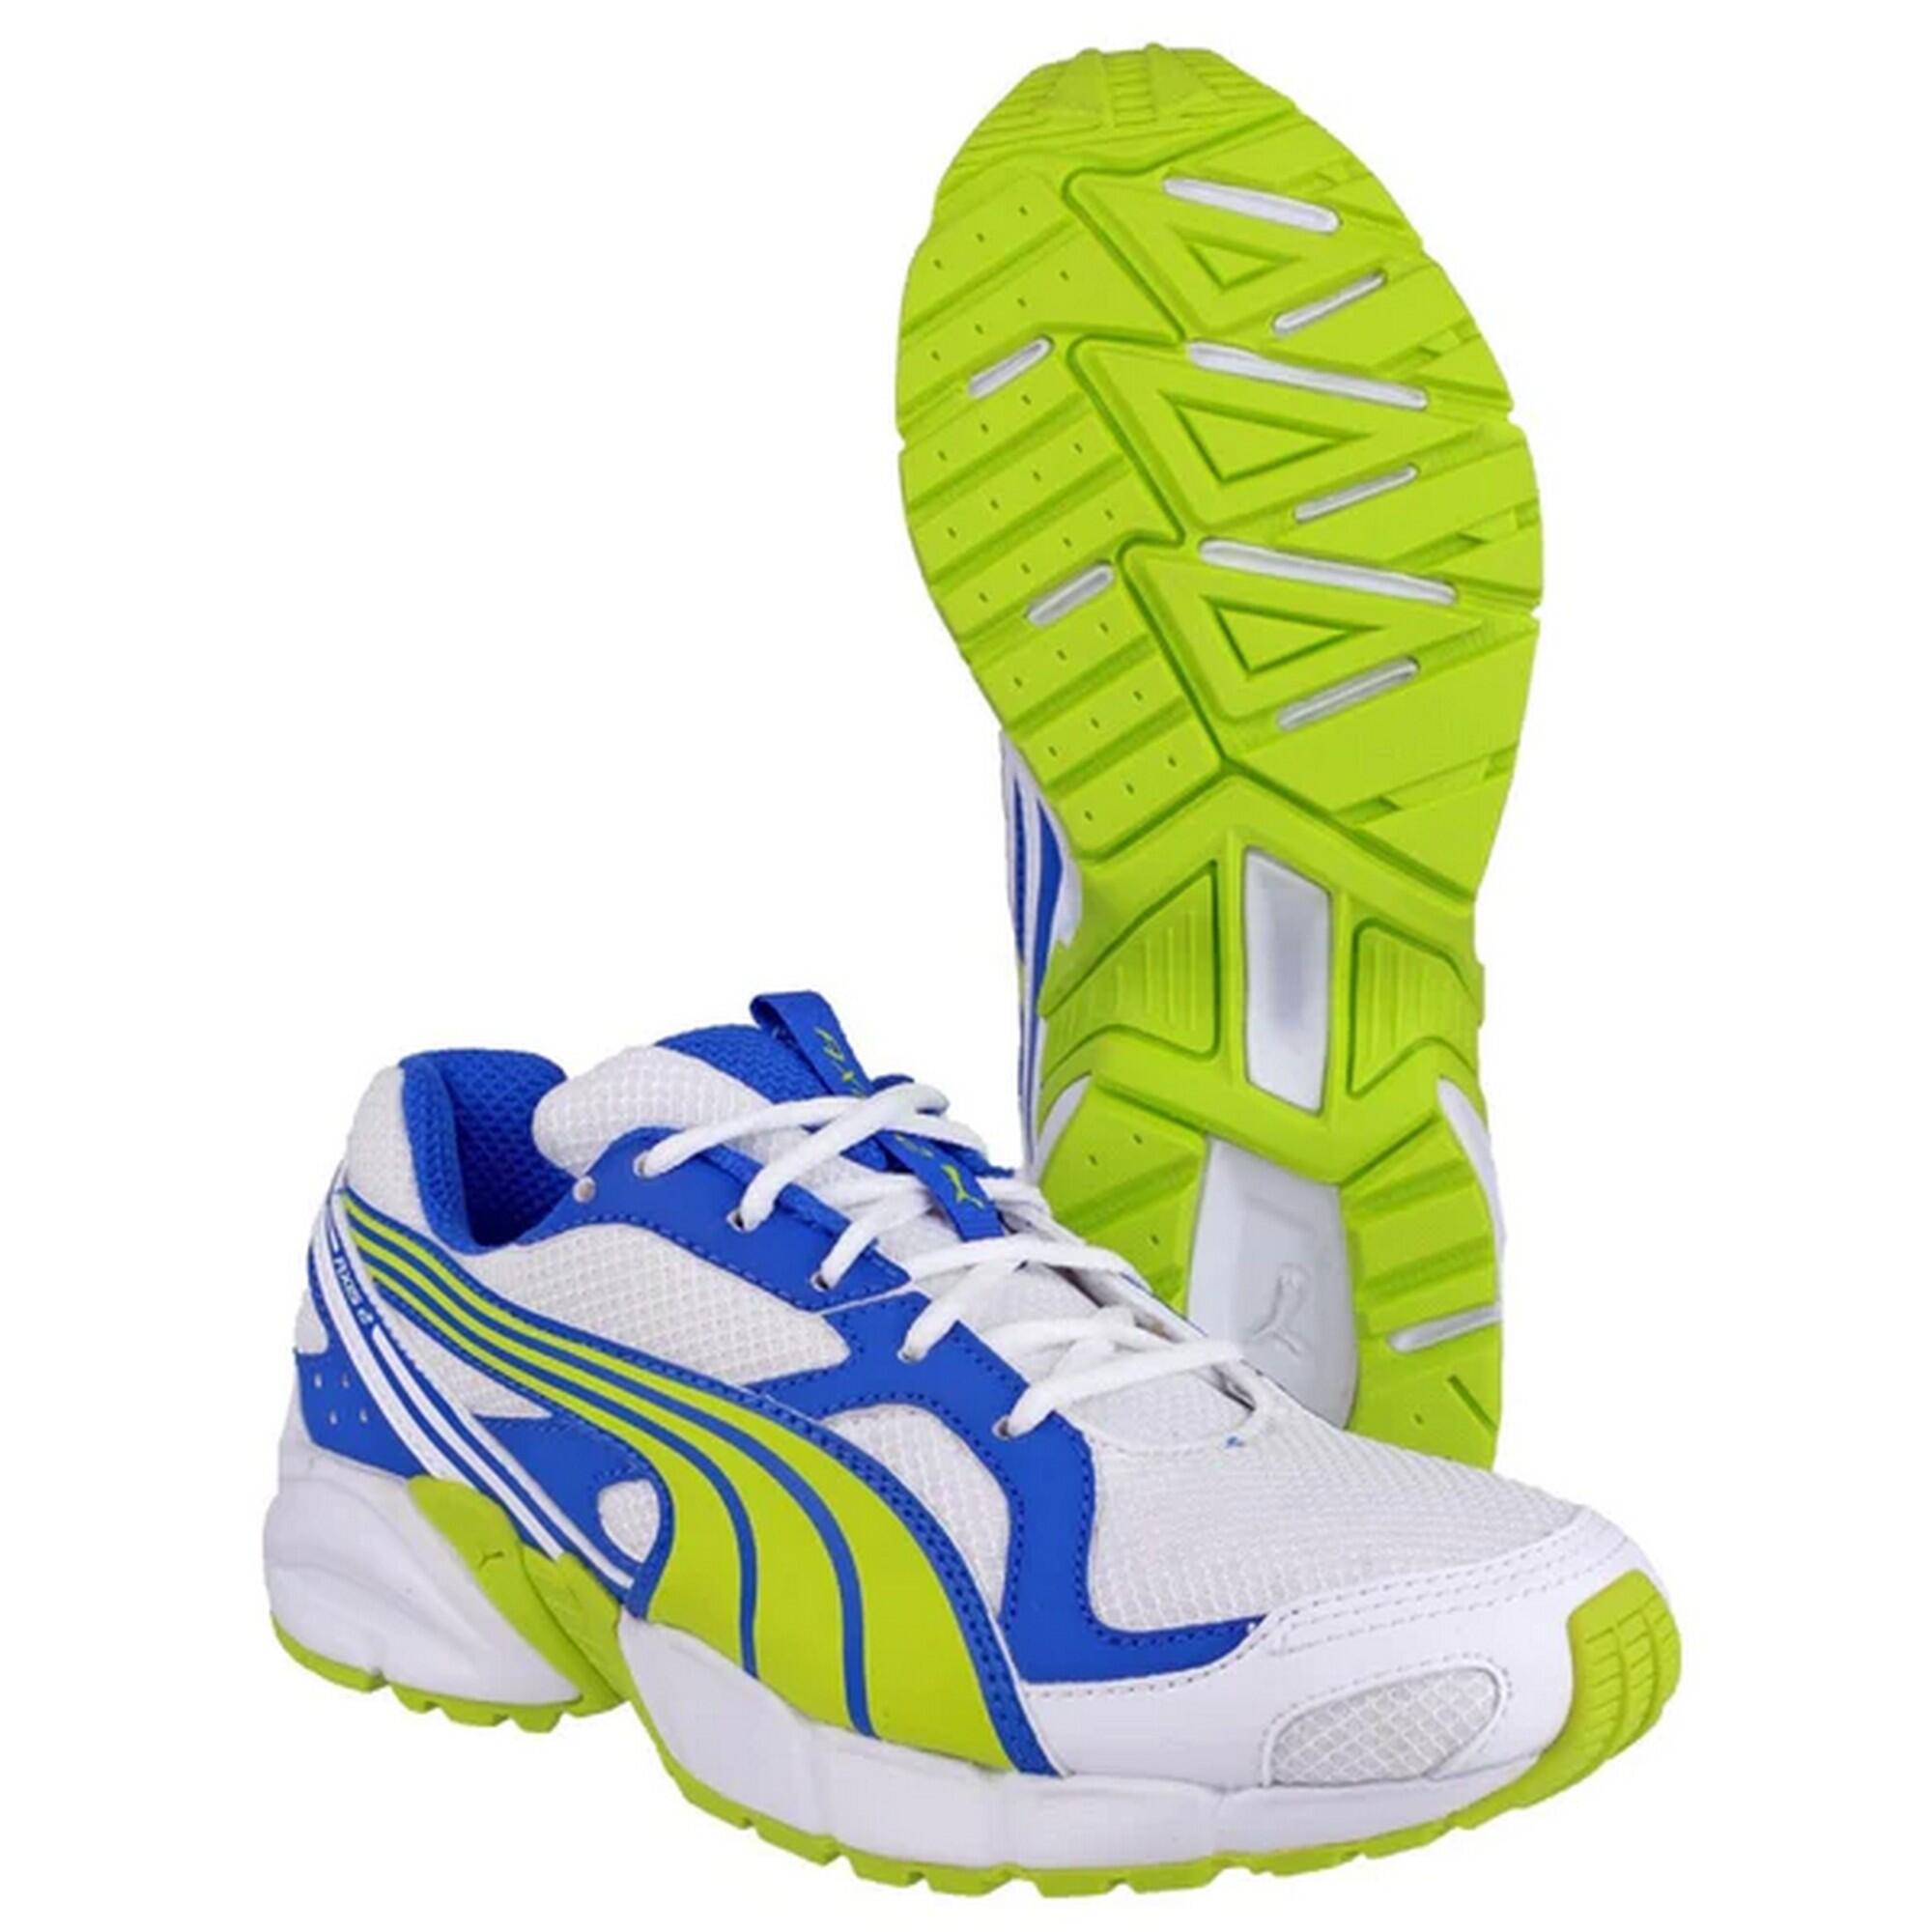 Axis Mesh V2 Lace Up Boys Trainers (Lime/Blue) 3/3